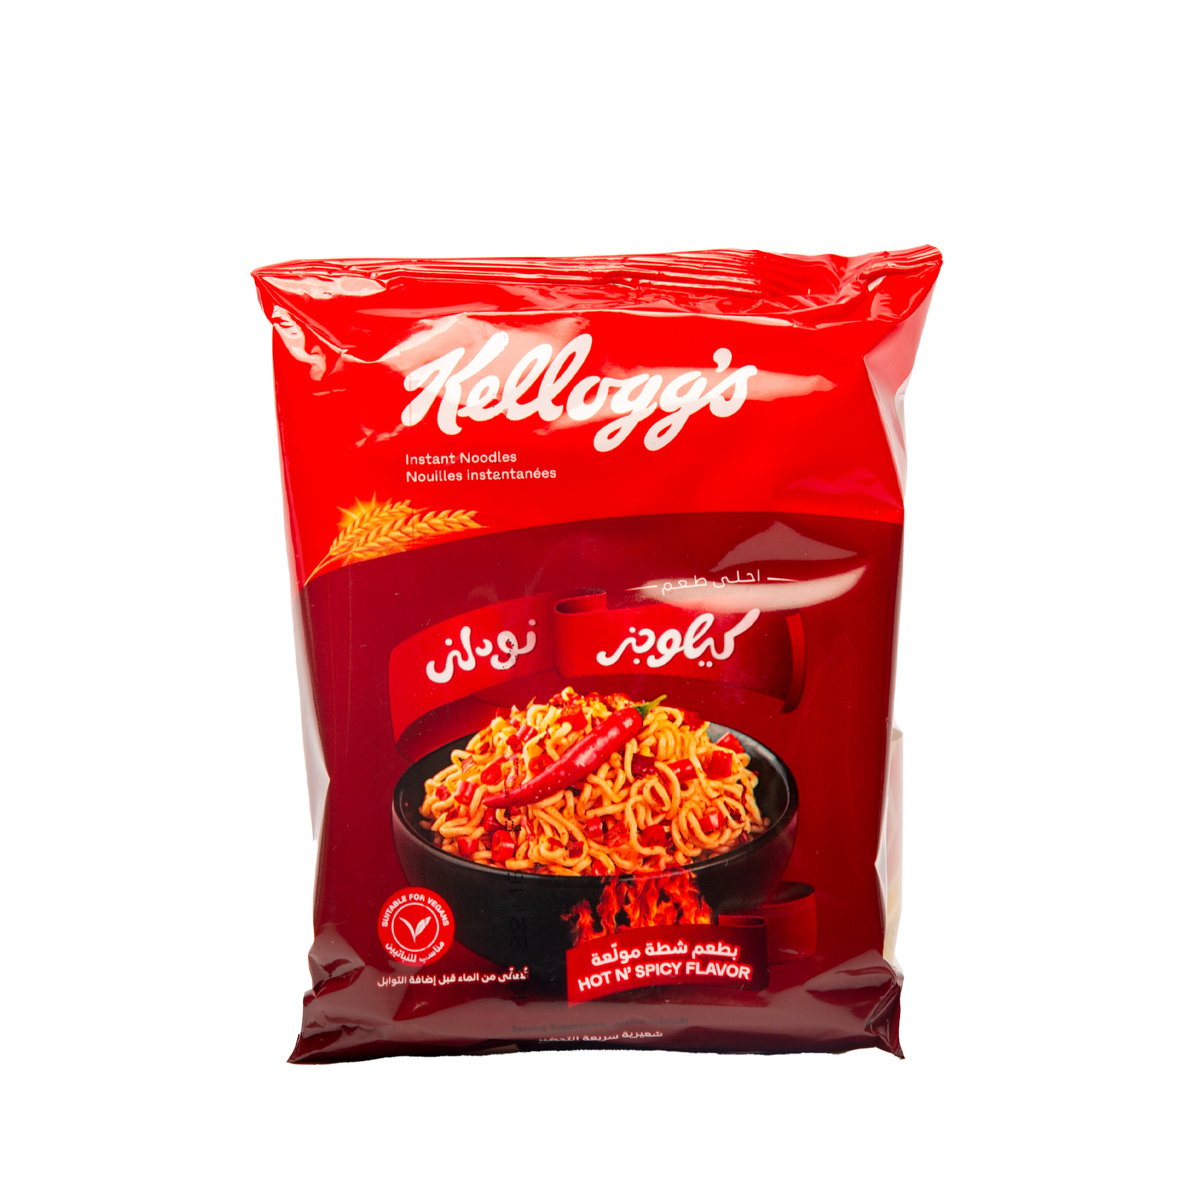 Kellogg's Hot N' Spicy Instant Noodles 70 g